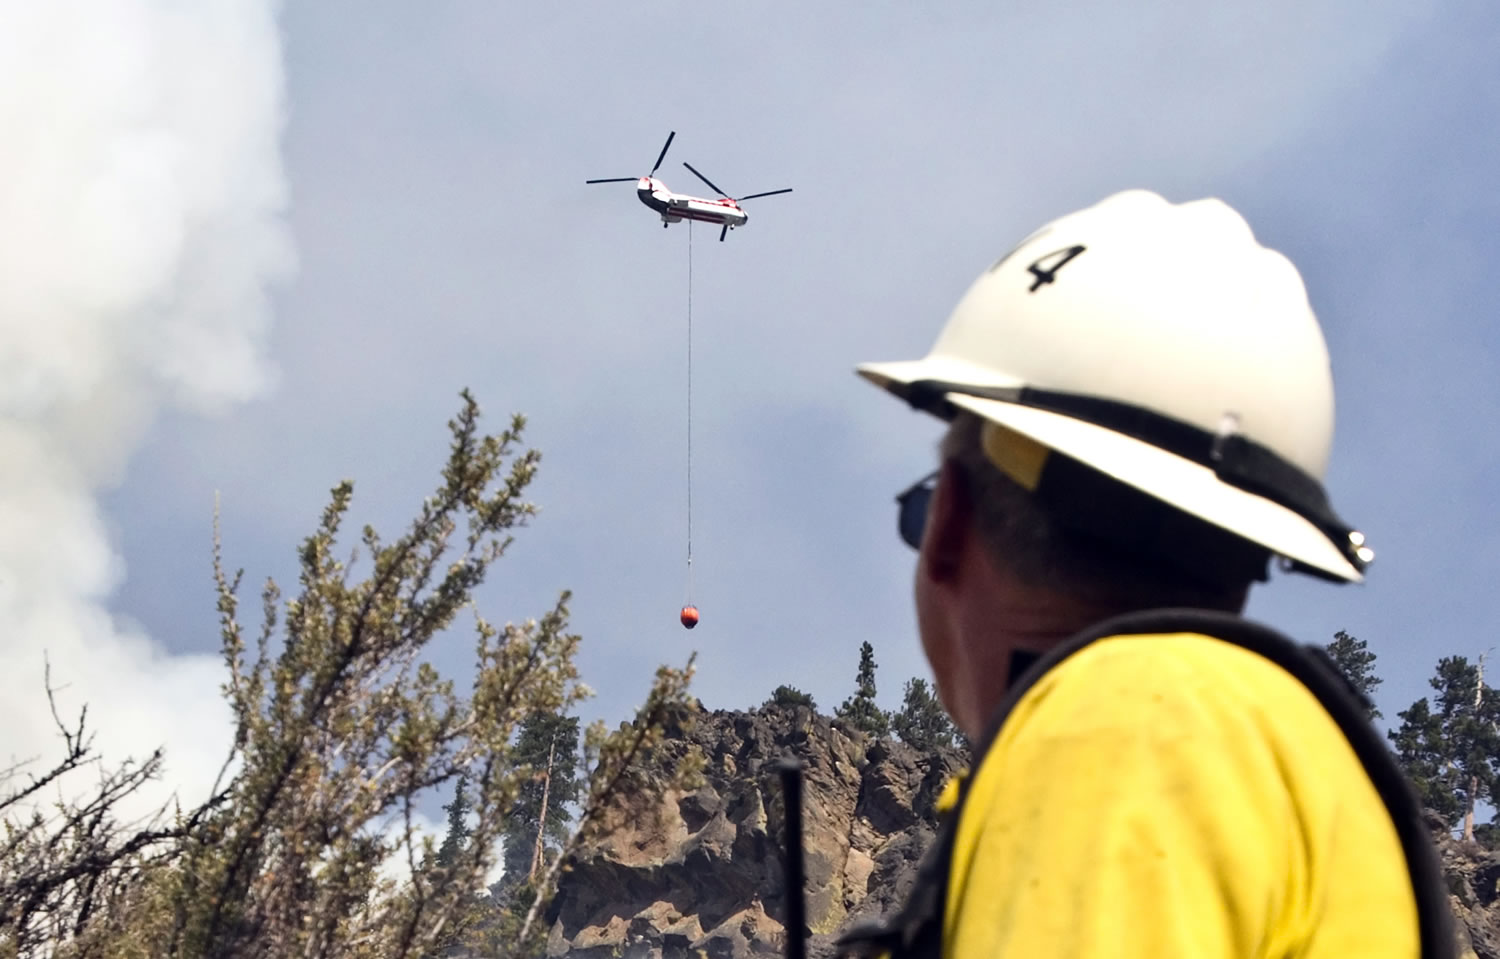 Firefighter Mike Ryan watches as a Chinook helicopter drops water on the Wild Rose fire along U.S. Highway 12 west of Naches on Sunday.